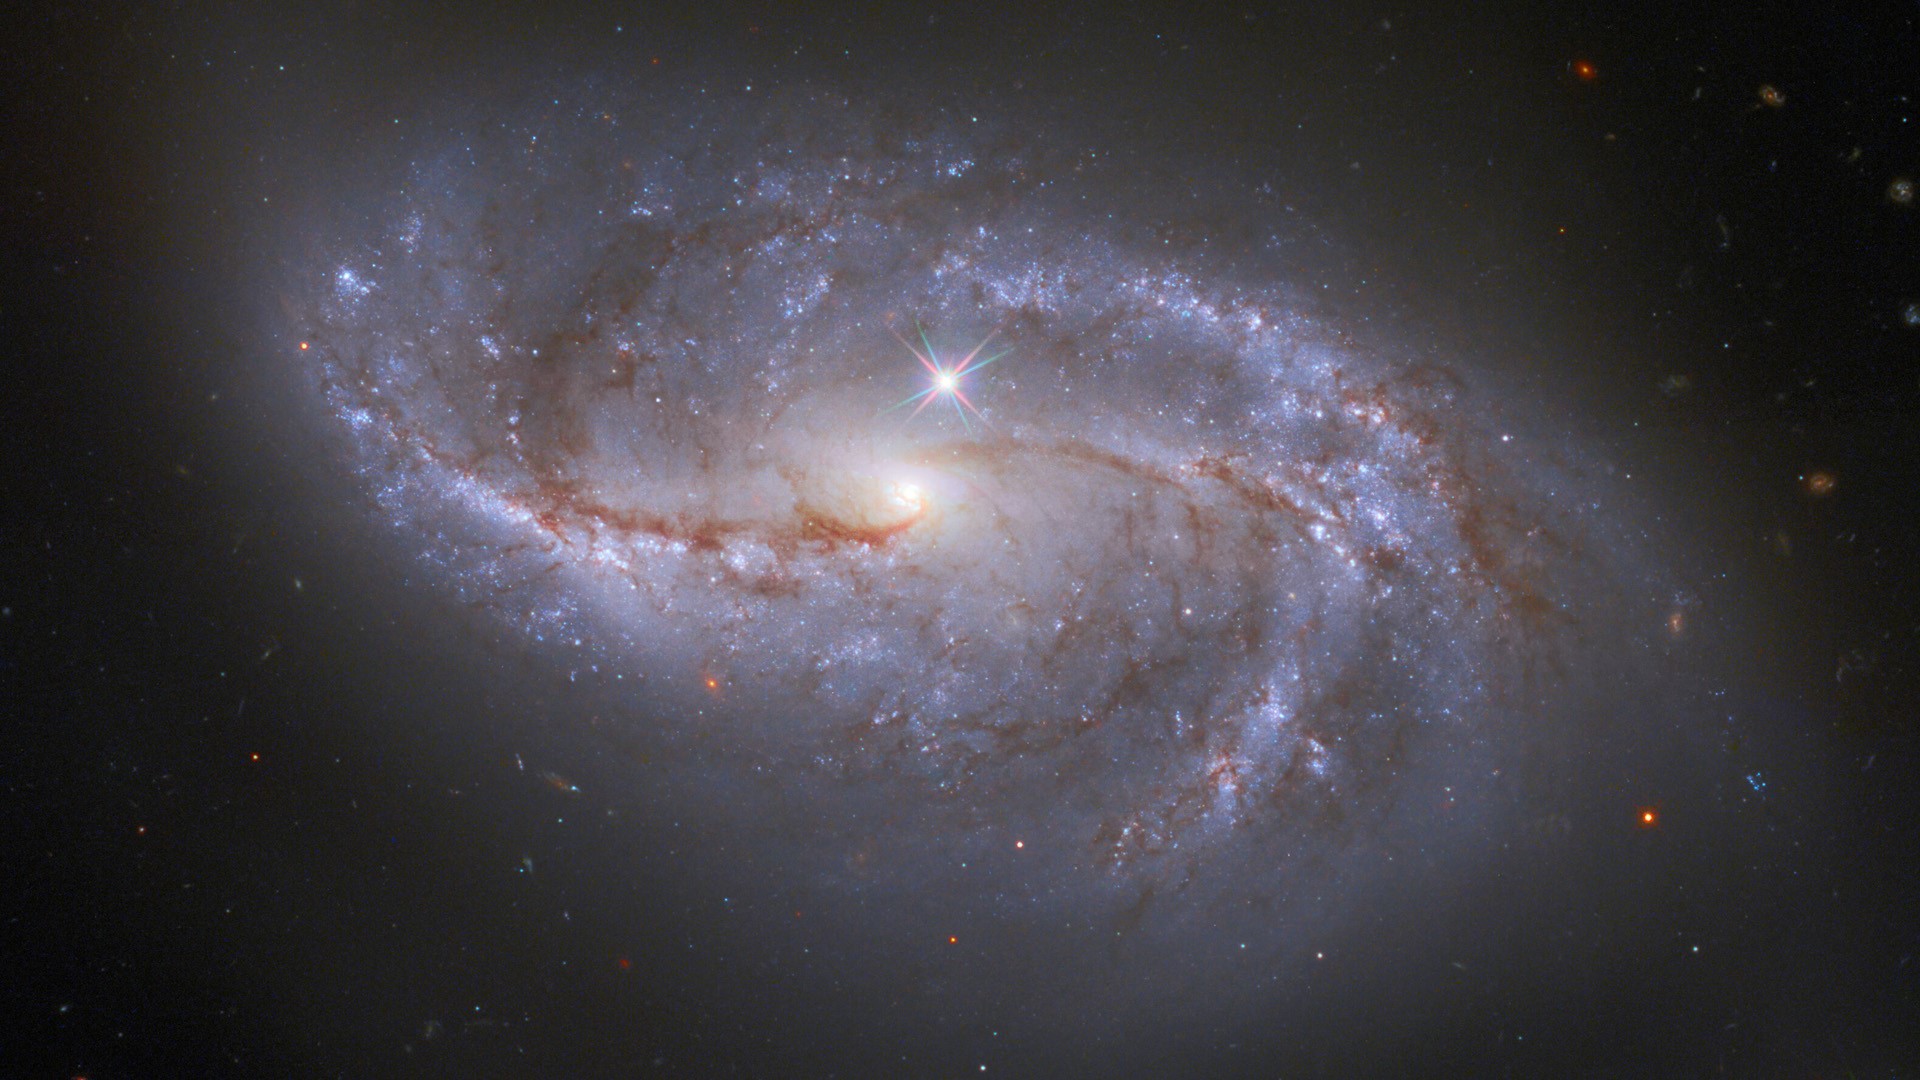 Barred spiral galaxy NGC 2608 in the constellation Cancer | Windows 10 Spotlight Images